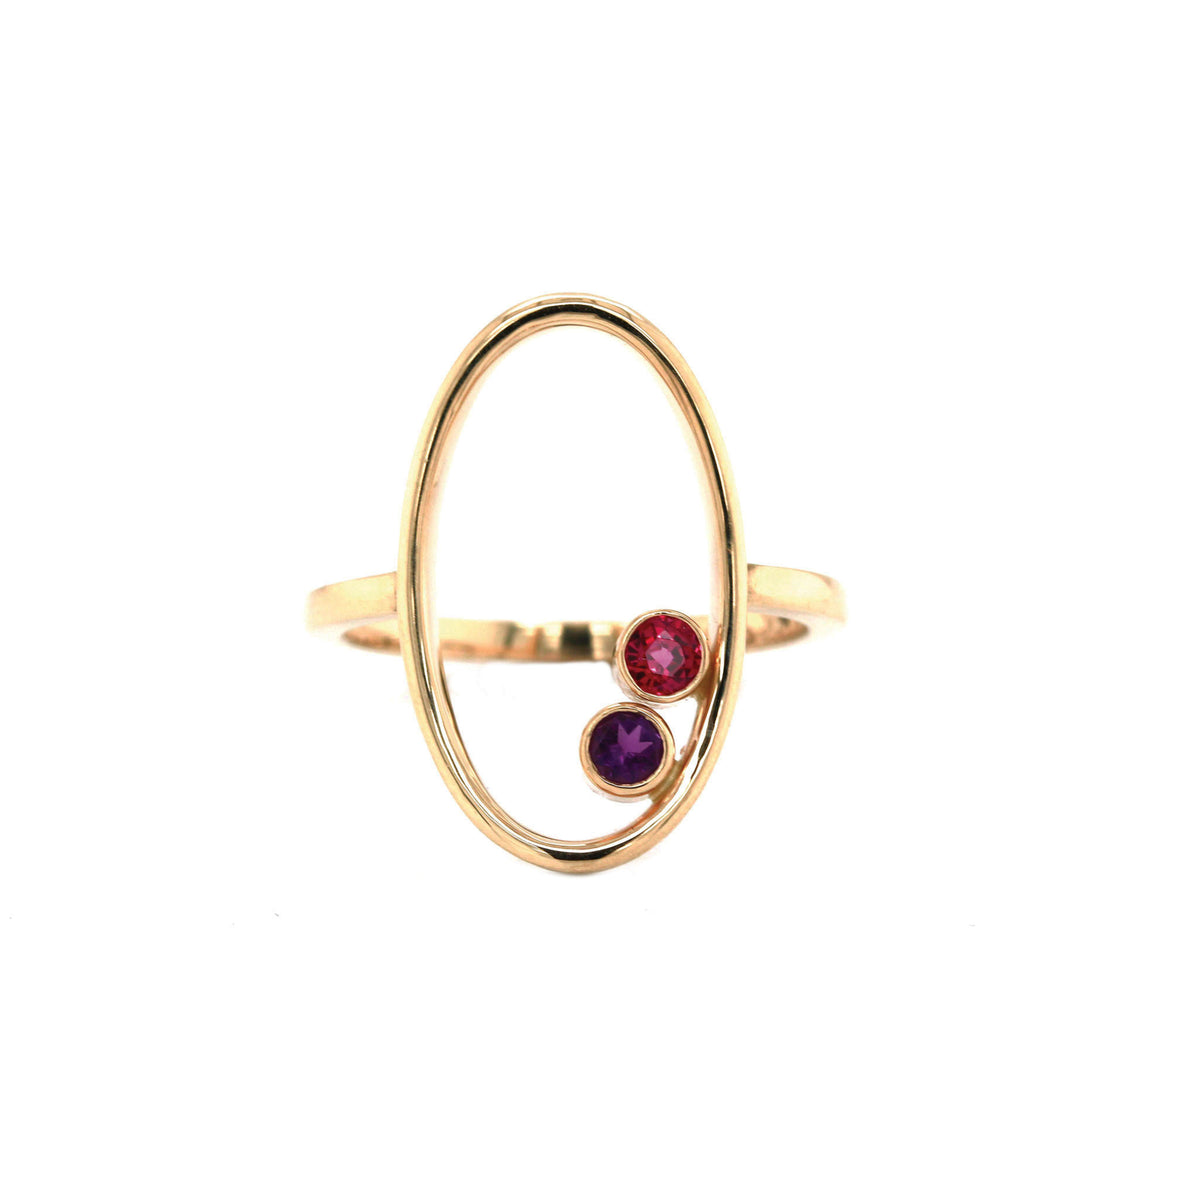 The Zuri Ring with Amethyst & Ruby